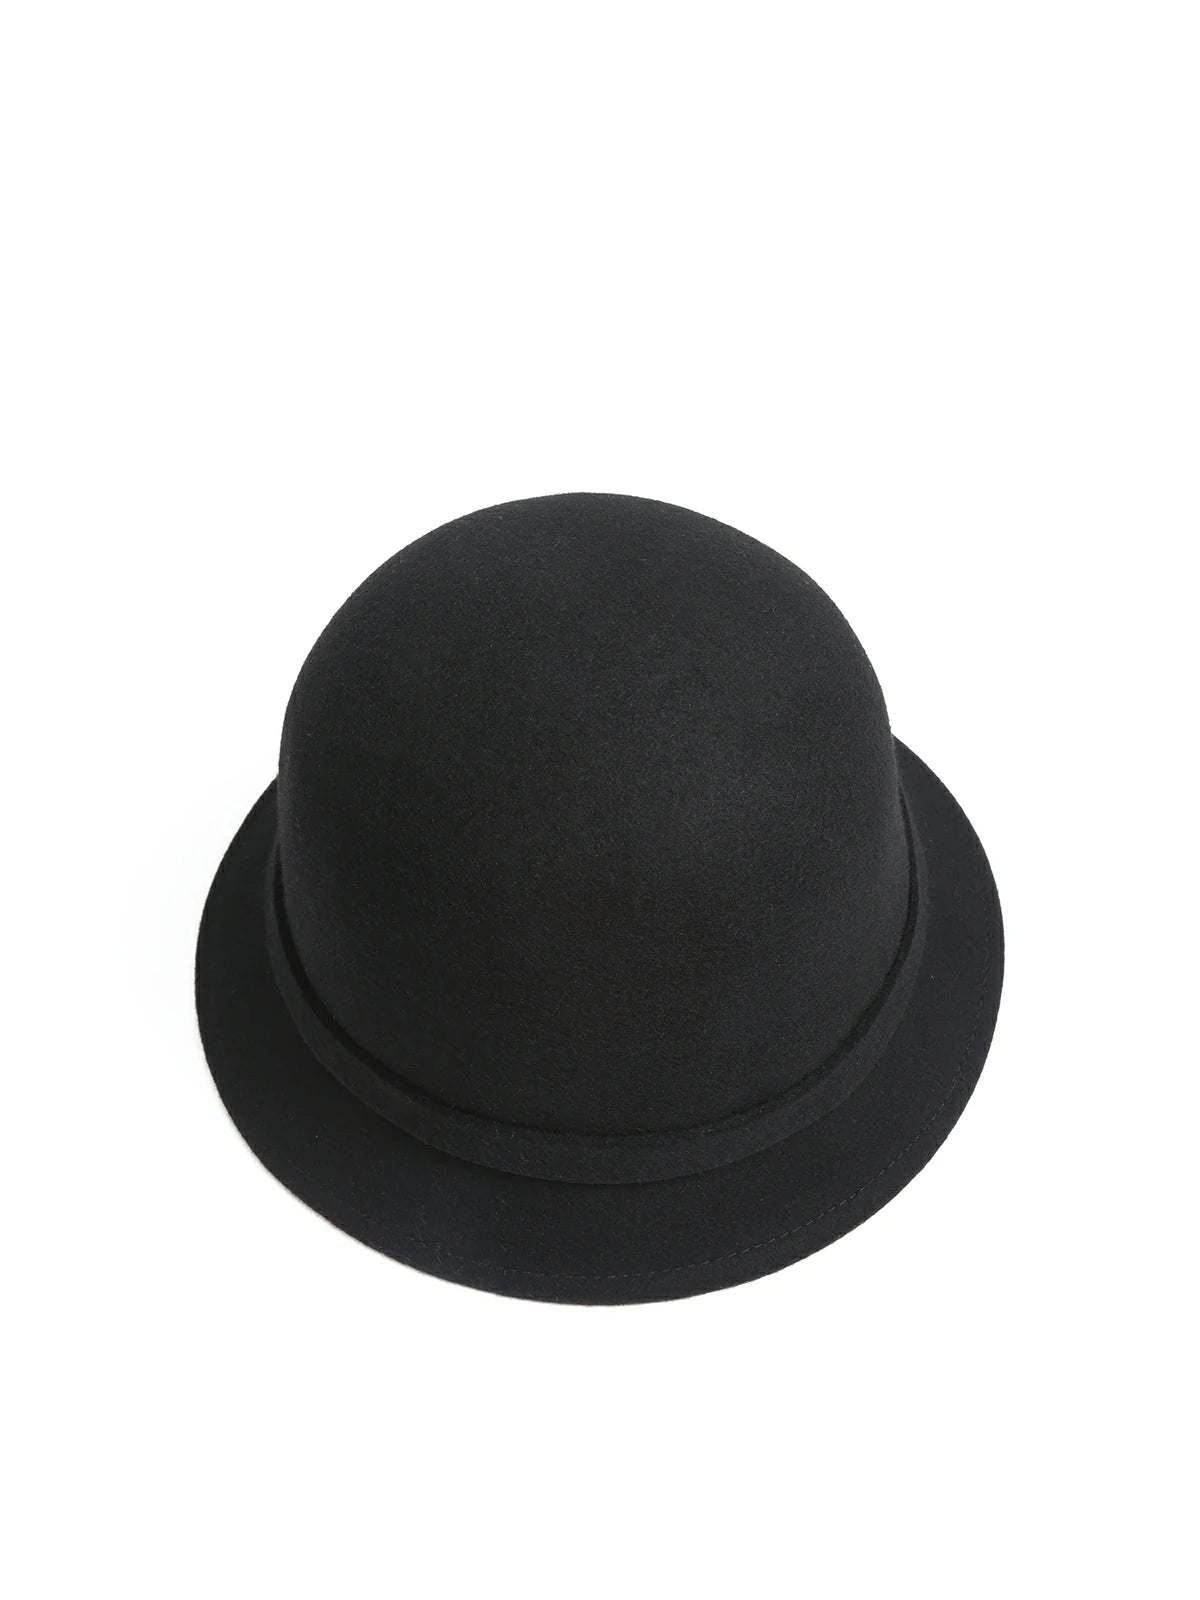 Classic Woolen Hat with Bow Detail: Perfect for a timeless look.